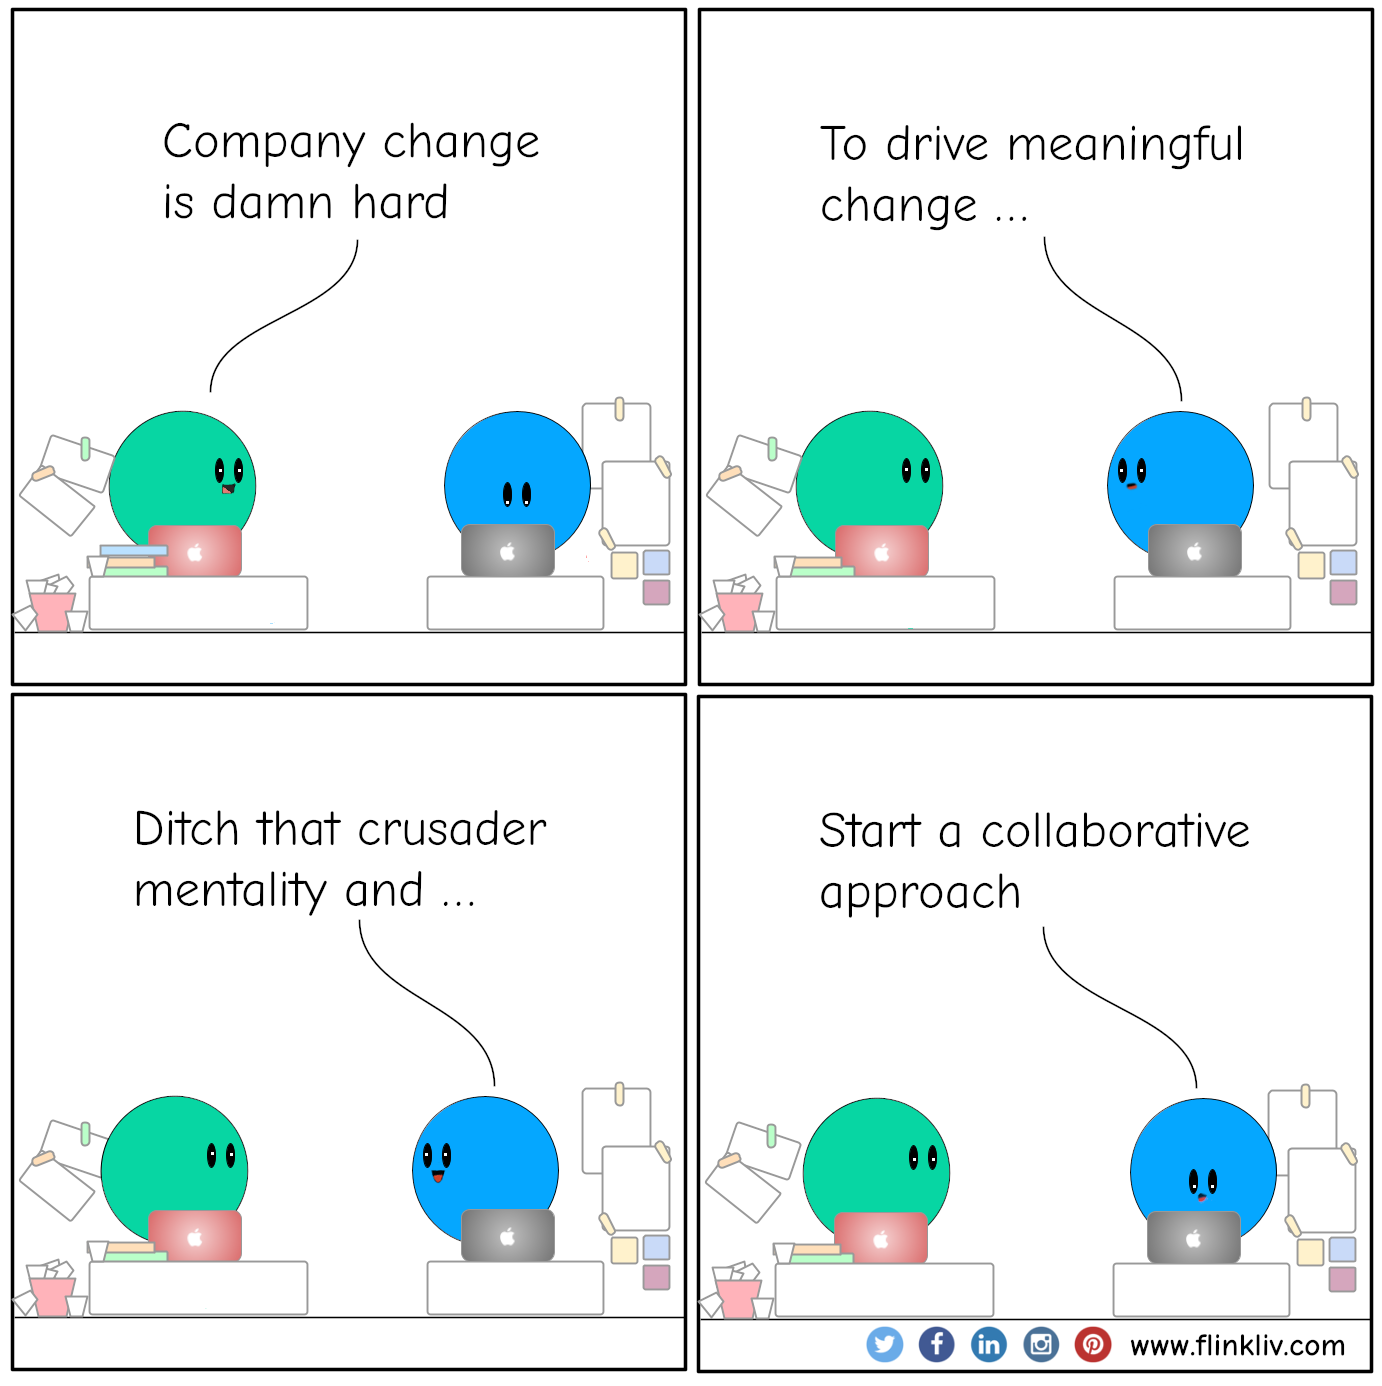 Conversation between A and B about how leaders have to shift from a crusader to a collaborative leader.
				A: Company change is damn hard
				B: To drive meaningful change
				B: Ditch that crusader mentality and start a collaborative approach
			